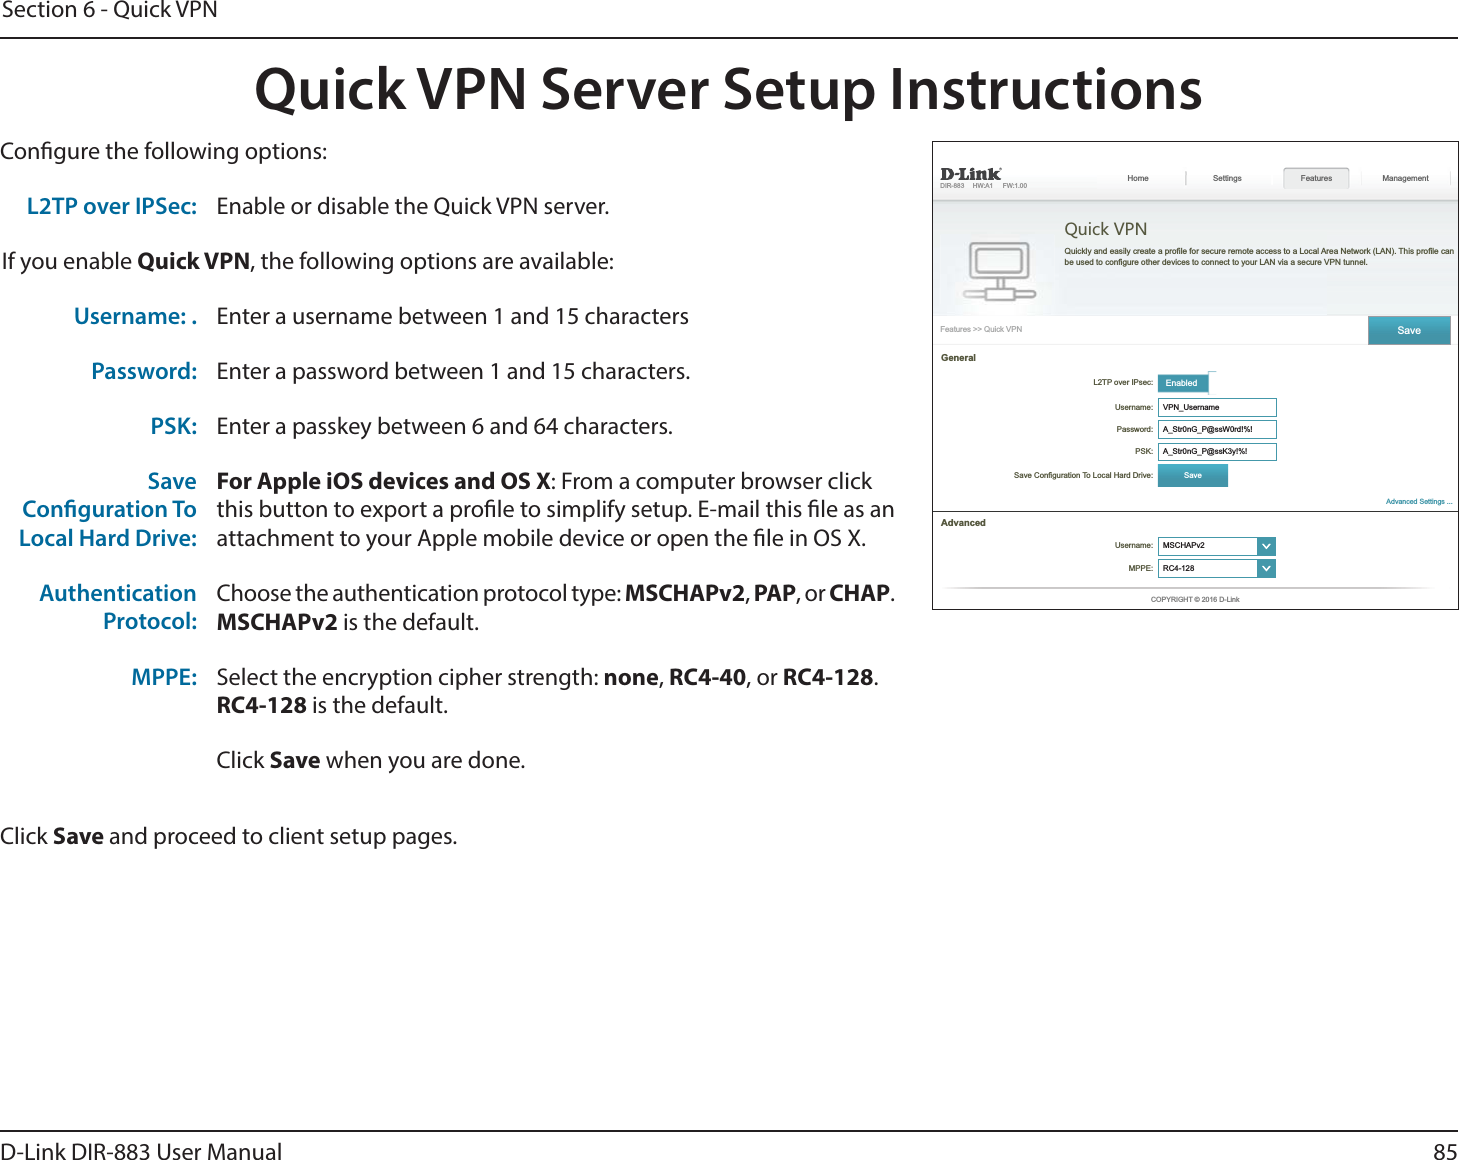 85D-Link DIR-883 User ManualSection 6 - Quick VPNQuick VPN Server Setup InstructionsCongure the following options:Click Save and proceed to client setup pages.  Quick VPN Features Management EnabledUsername: Password:   GeneralUsername: ໹MPPE: ໹L2TP over IPSec: Enable or disable the Quick VPN server.If you enable Quick VPN, the following options are available:Username: . Enter a username between 1 and 15 charactersPassword: Enter a password between 1 and 15 characters.PSK: Enter a passkey between 6 and 64 characters.SaveConguration ToLocal Hard Drive:For Apple iOS devices and OS X: From a computer browser clickthis button to export a prole to simplify setup. E-mail this le as anattachment to your Apple mobile device or open the le in OS X.AuthenticationProtocol:Choose the authentication protocol type: MSCHAPv2, PAP, or CHAP.MSCHAPv2 is the default.MPPE: Select the encryption cipher strength: none, RC4-40, or RC4-128.RC4-128 is the default.Click Save when you are done.